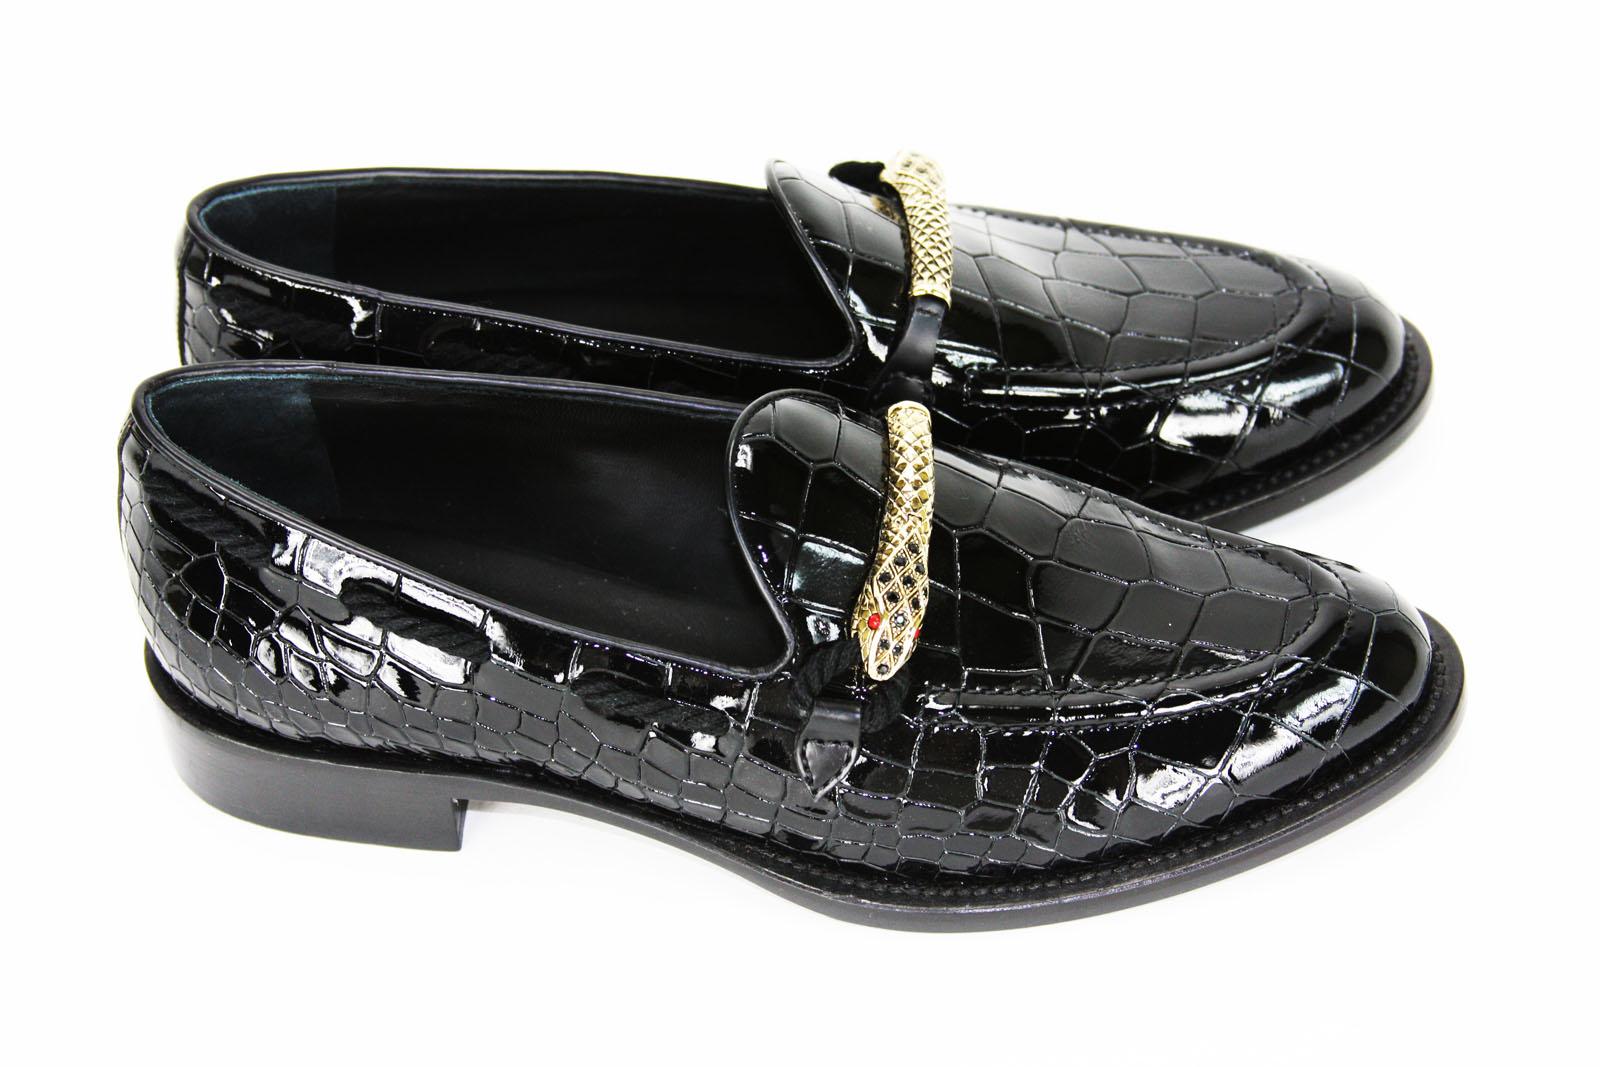 New Women's Giuseppe Zanotti Embellished Loafers
Designer size - 39
Black Patent Leather, Crocodile Print, Gold-tone Metal Jeweled Snake Application, Black Twisted Rope, Leather Lining and Sole.
Heel Height - 1 inch., Insole - 10.25 inches.
Made in